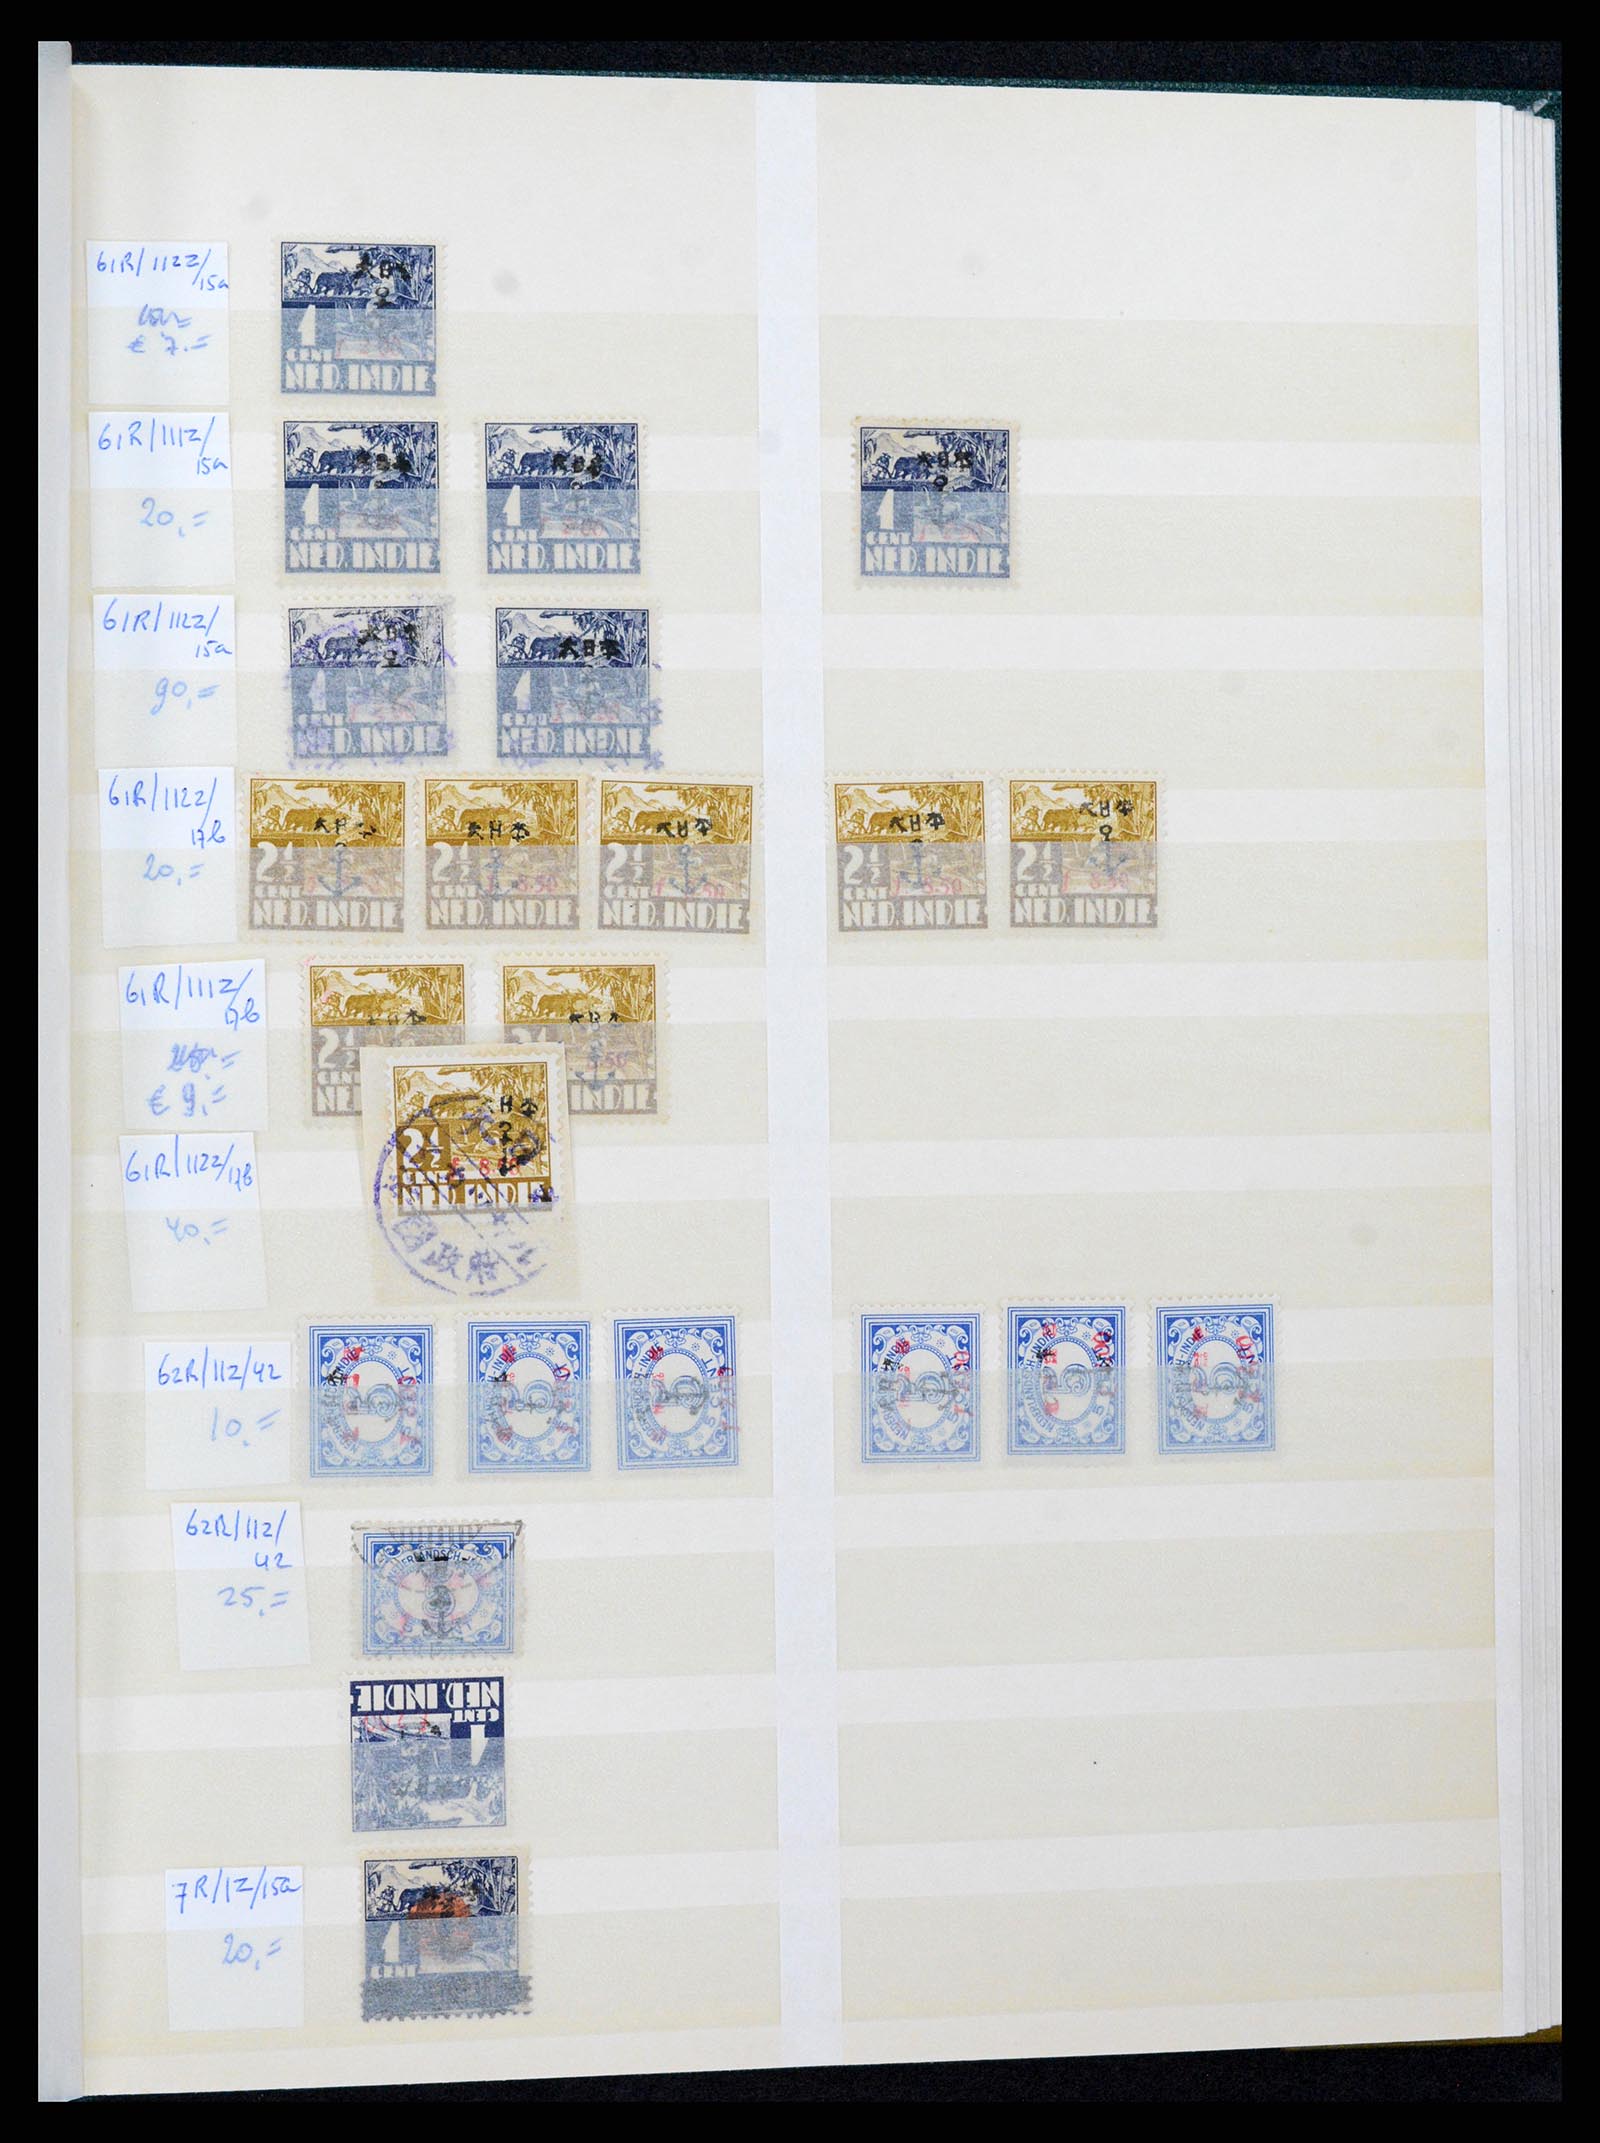 37429 029 - Stamp collection 37429 Japanese occupation Dutch East Indies 1942-1945.